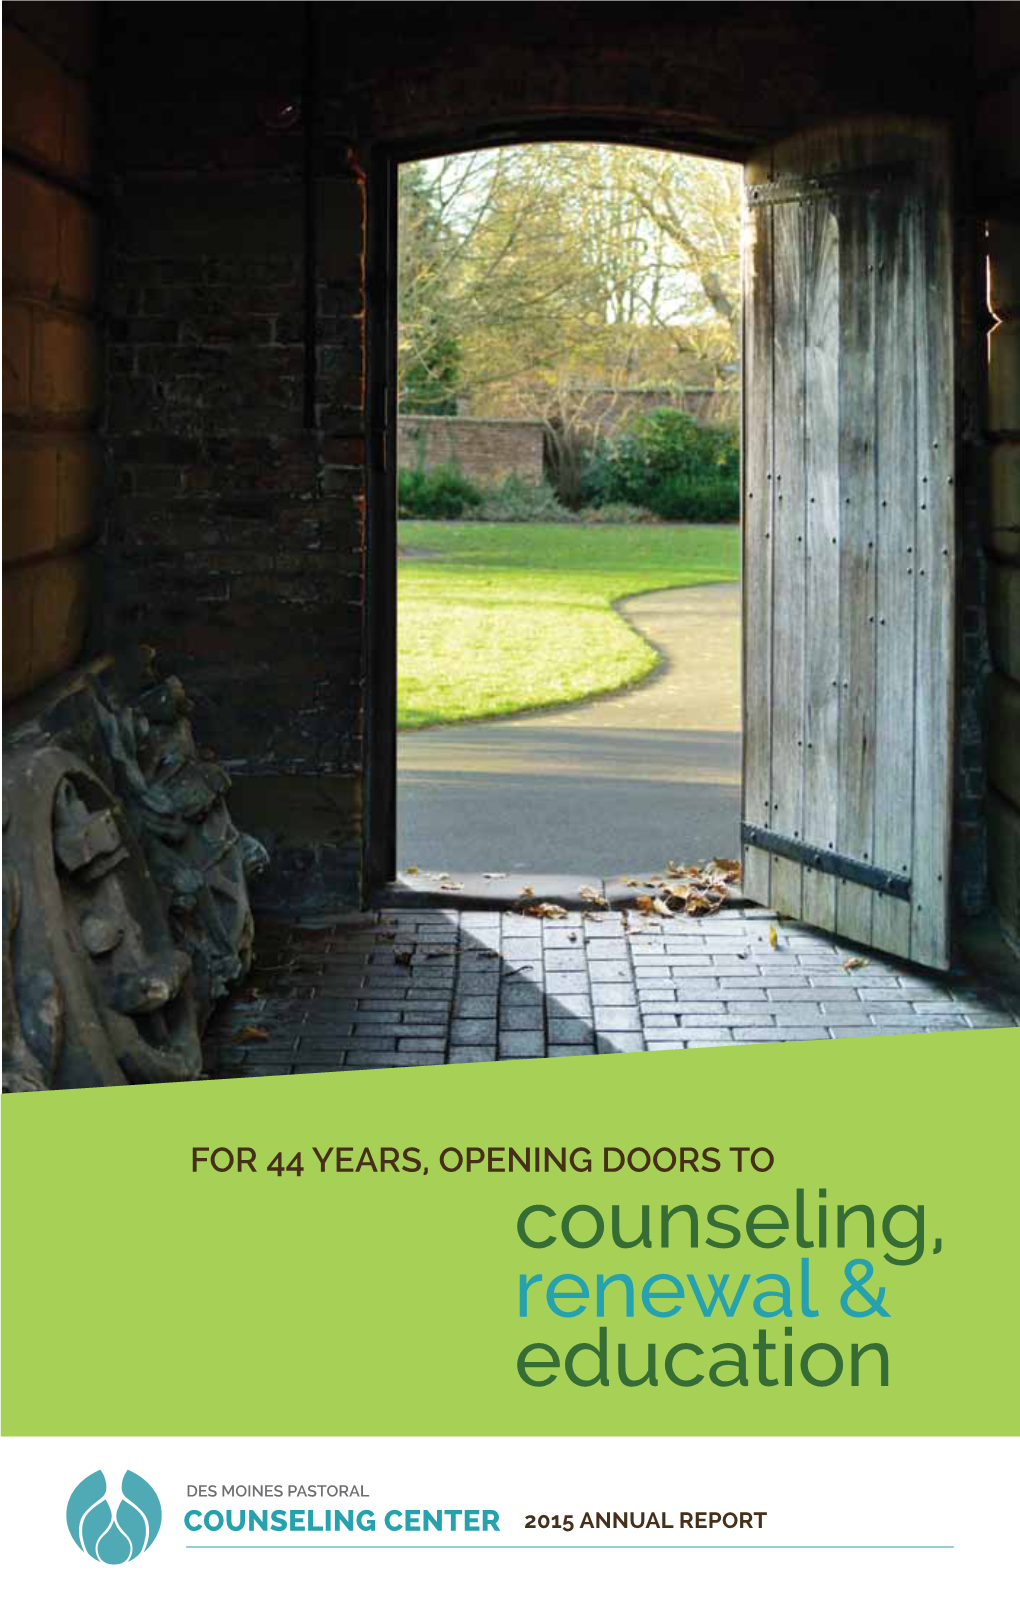 2015 Annual Report – Des Moines Pastoral Counseling